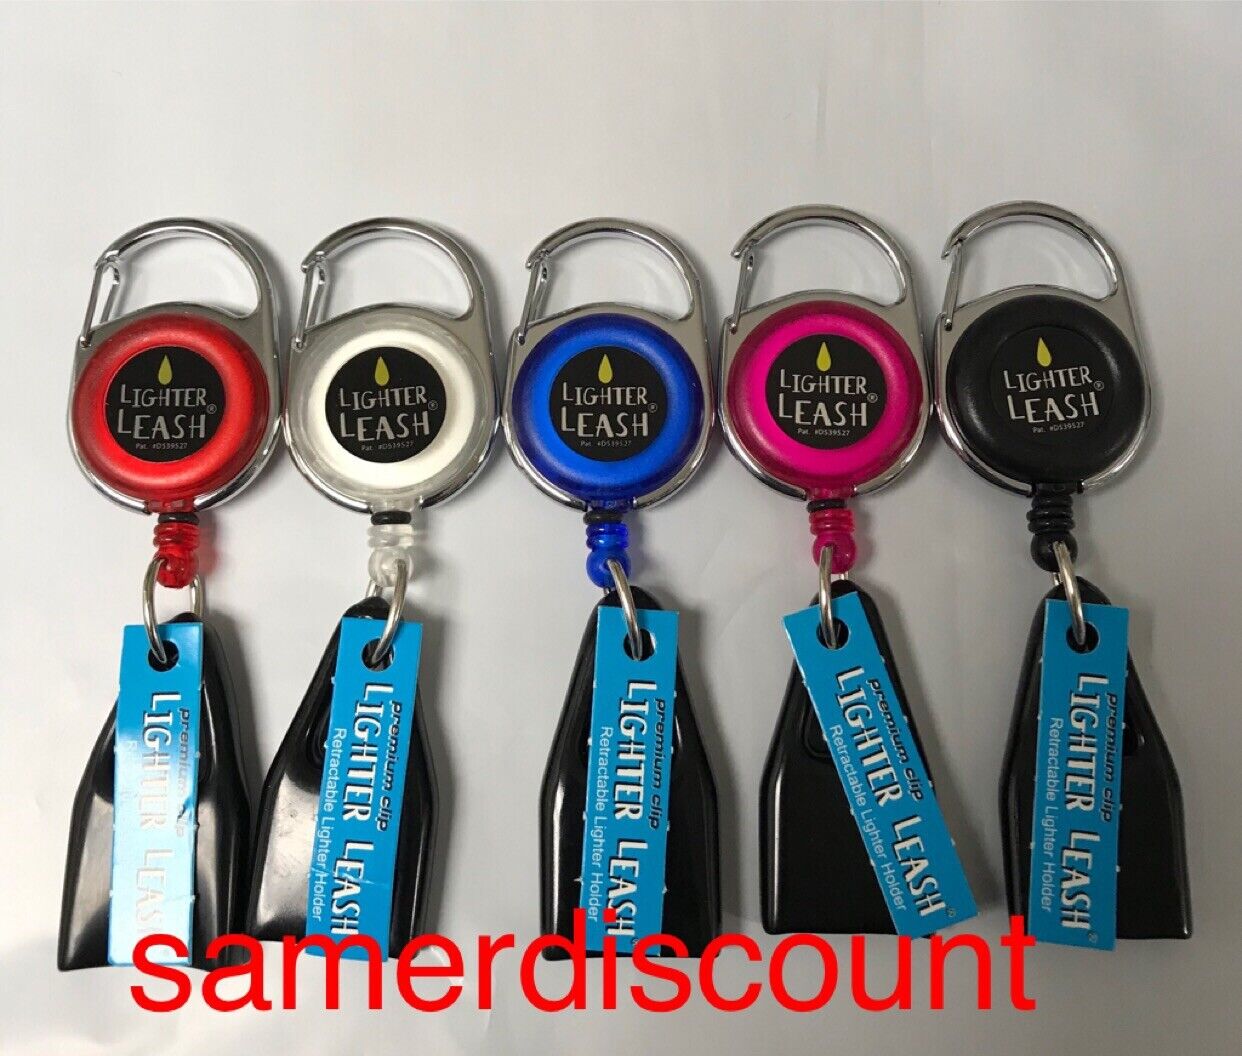 LIGHTER LEASH PREMIUM Clip Retractable * 5 COLORS* NEW ( 5 ITEMS PER LOT ) Unbranded/Generic Does Not Apply